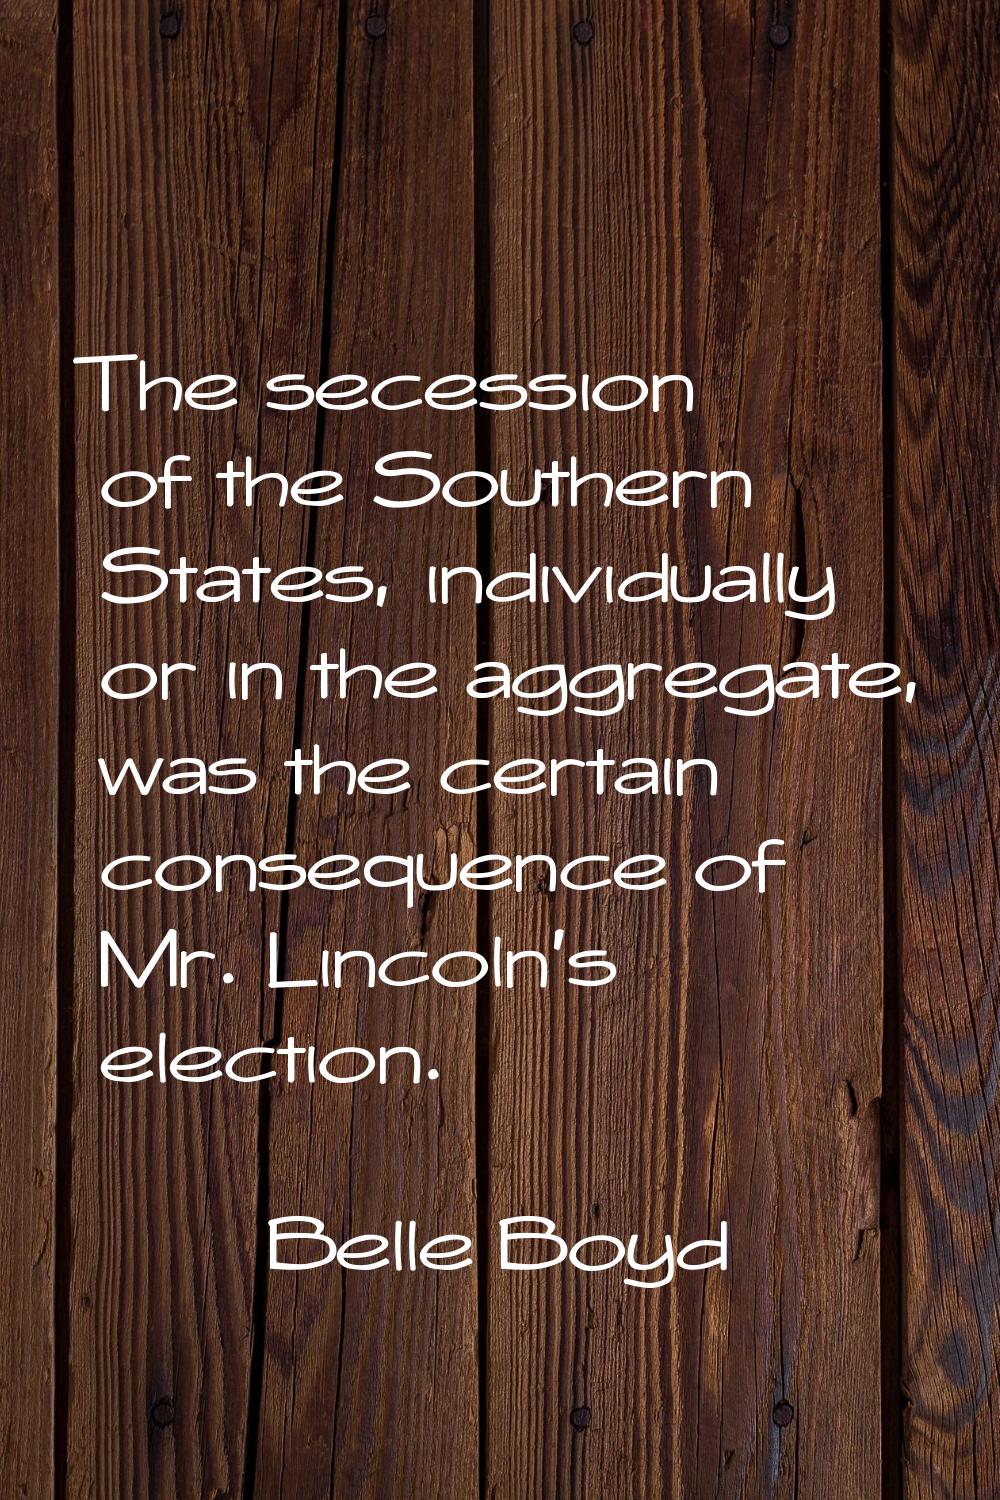 The secession of the Southern States, individually or in the aggregate, was the certain consequence